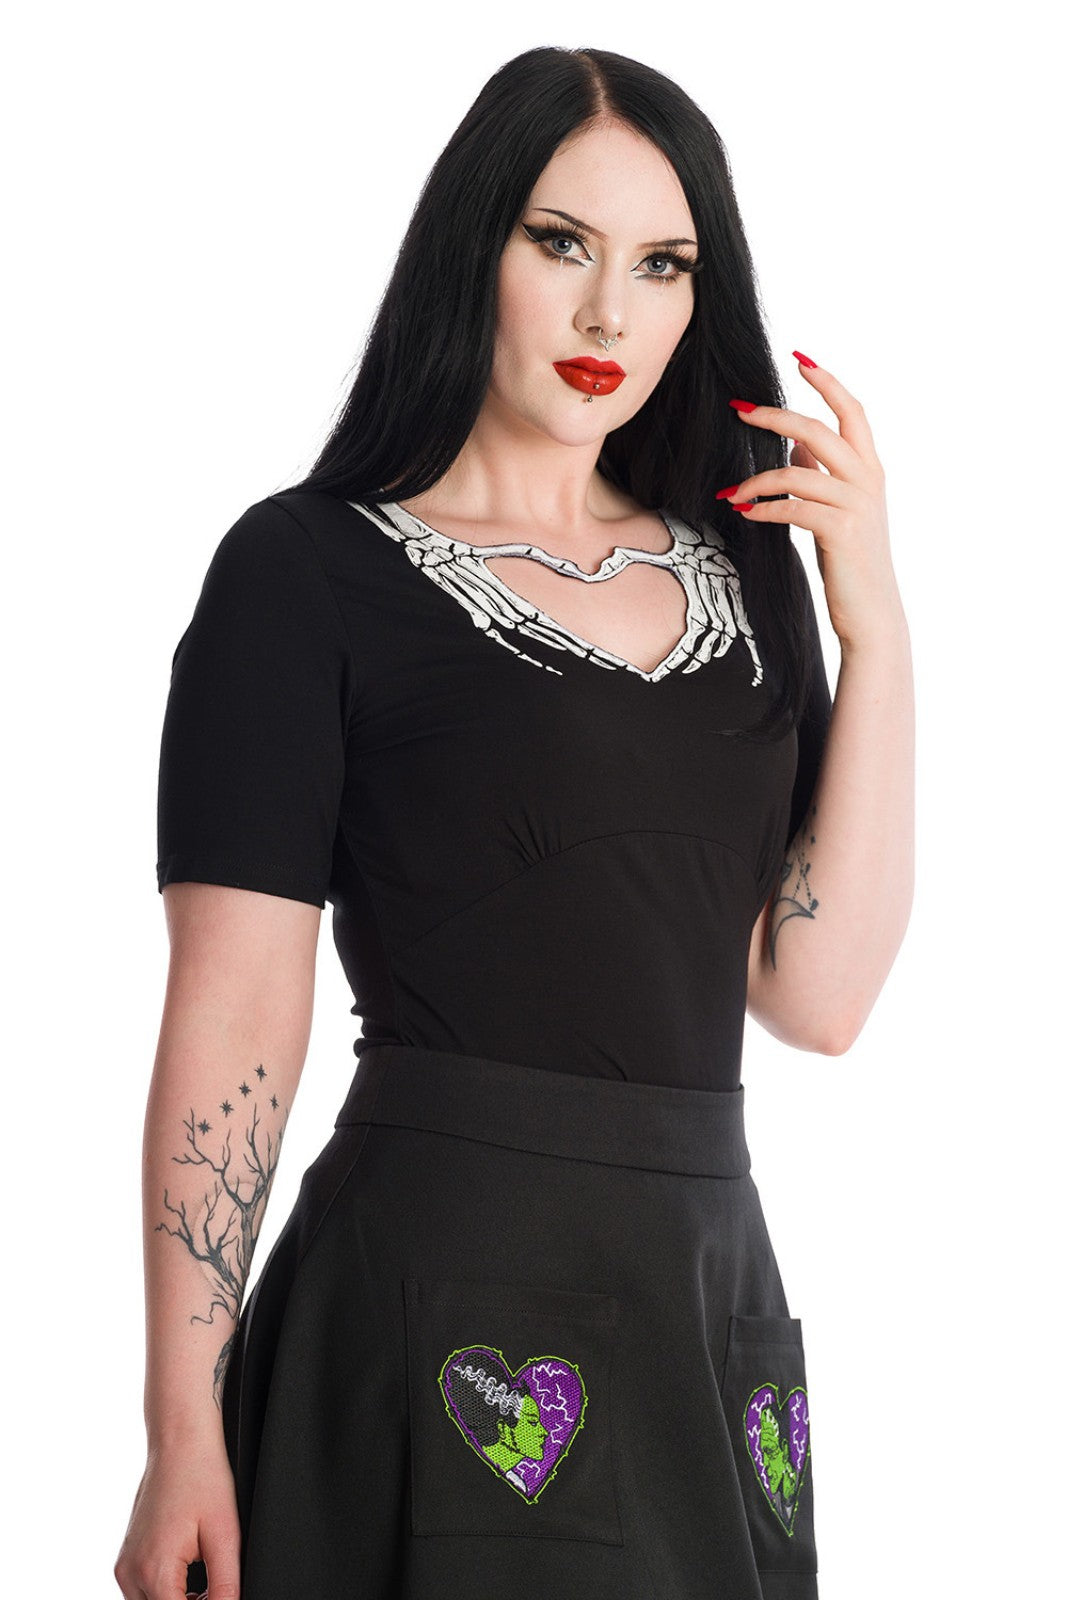 Banned Skeleton Heart T-shirt Cut-Out Underbust Gothic Alternative Keyhole Top